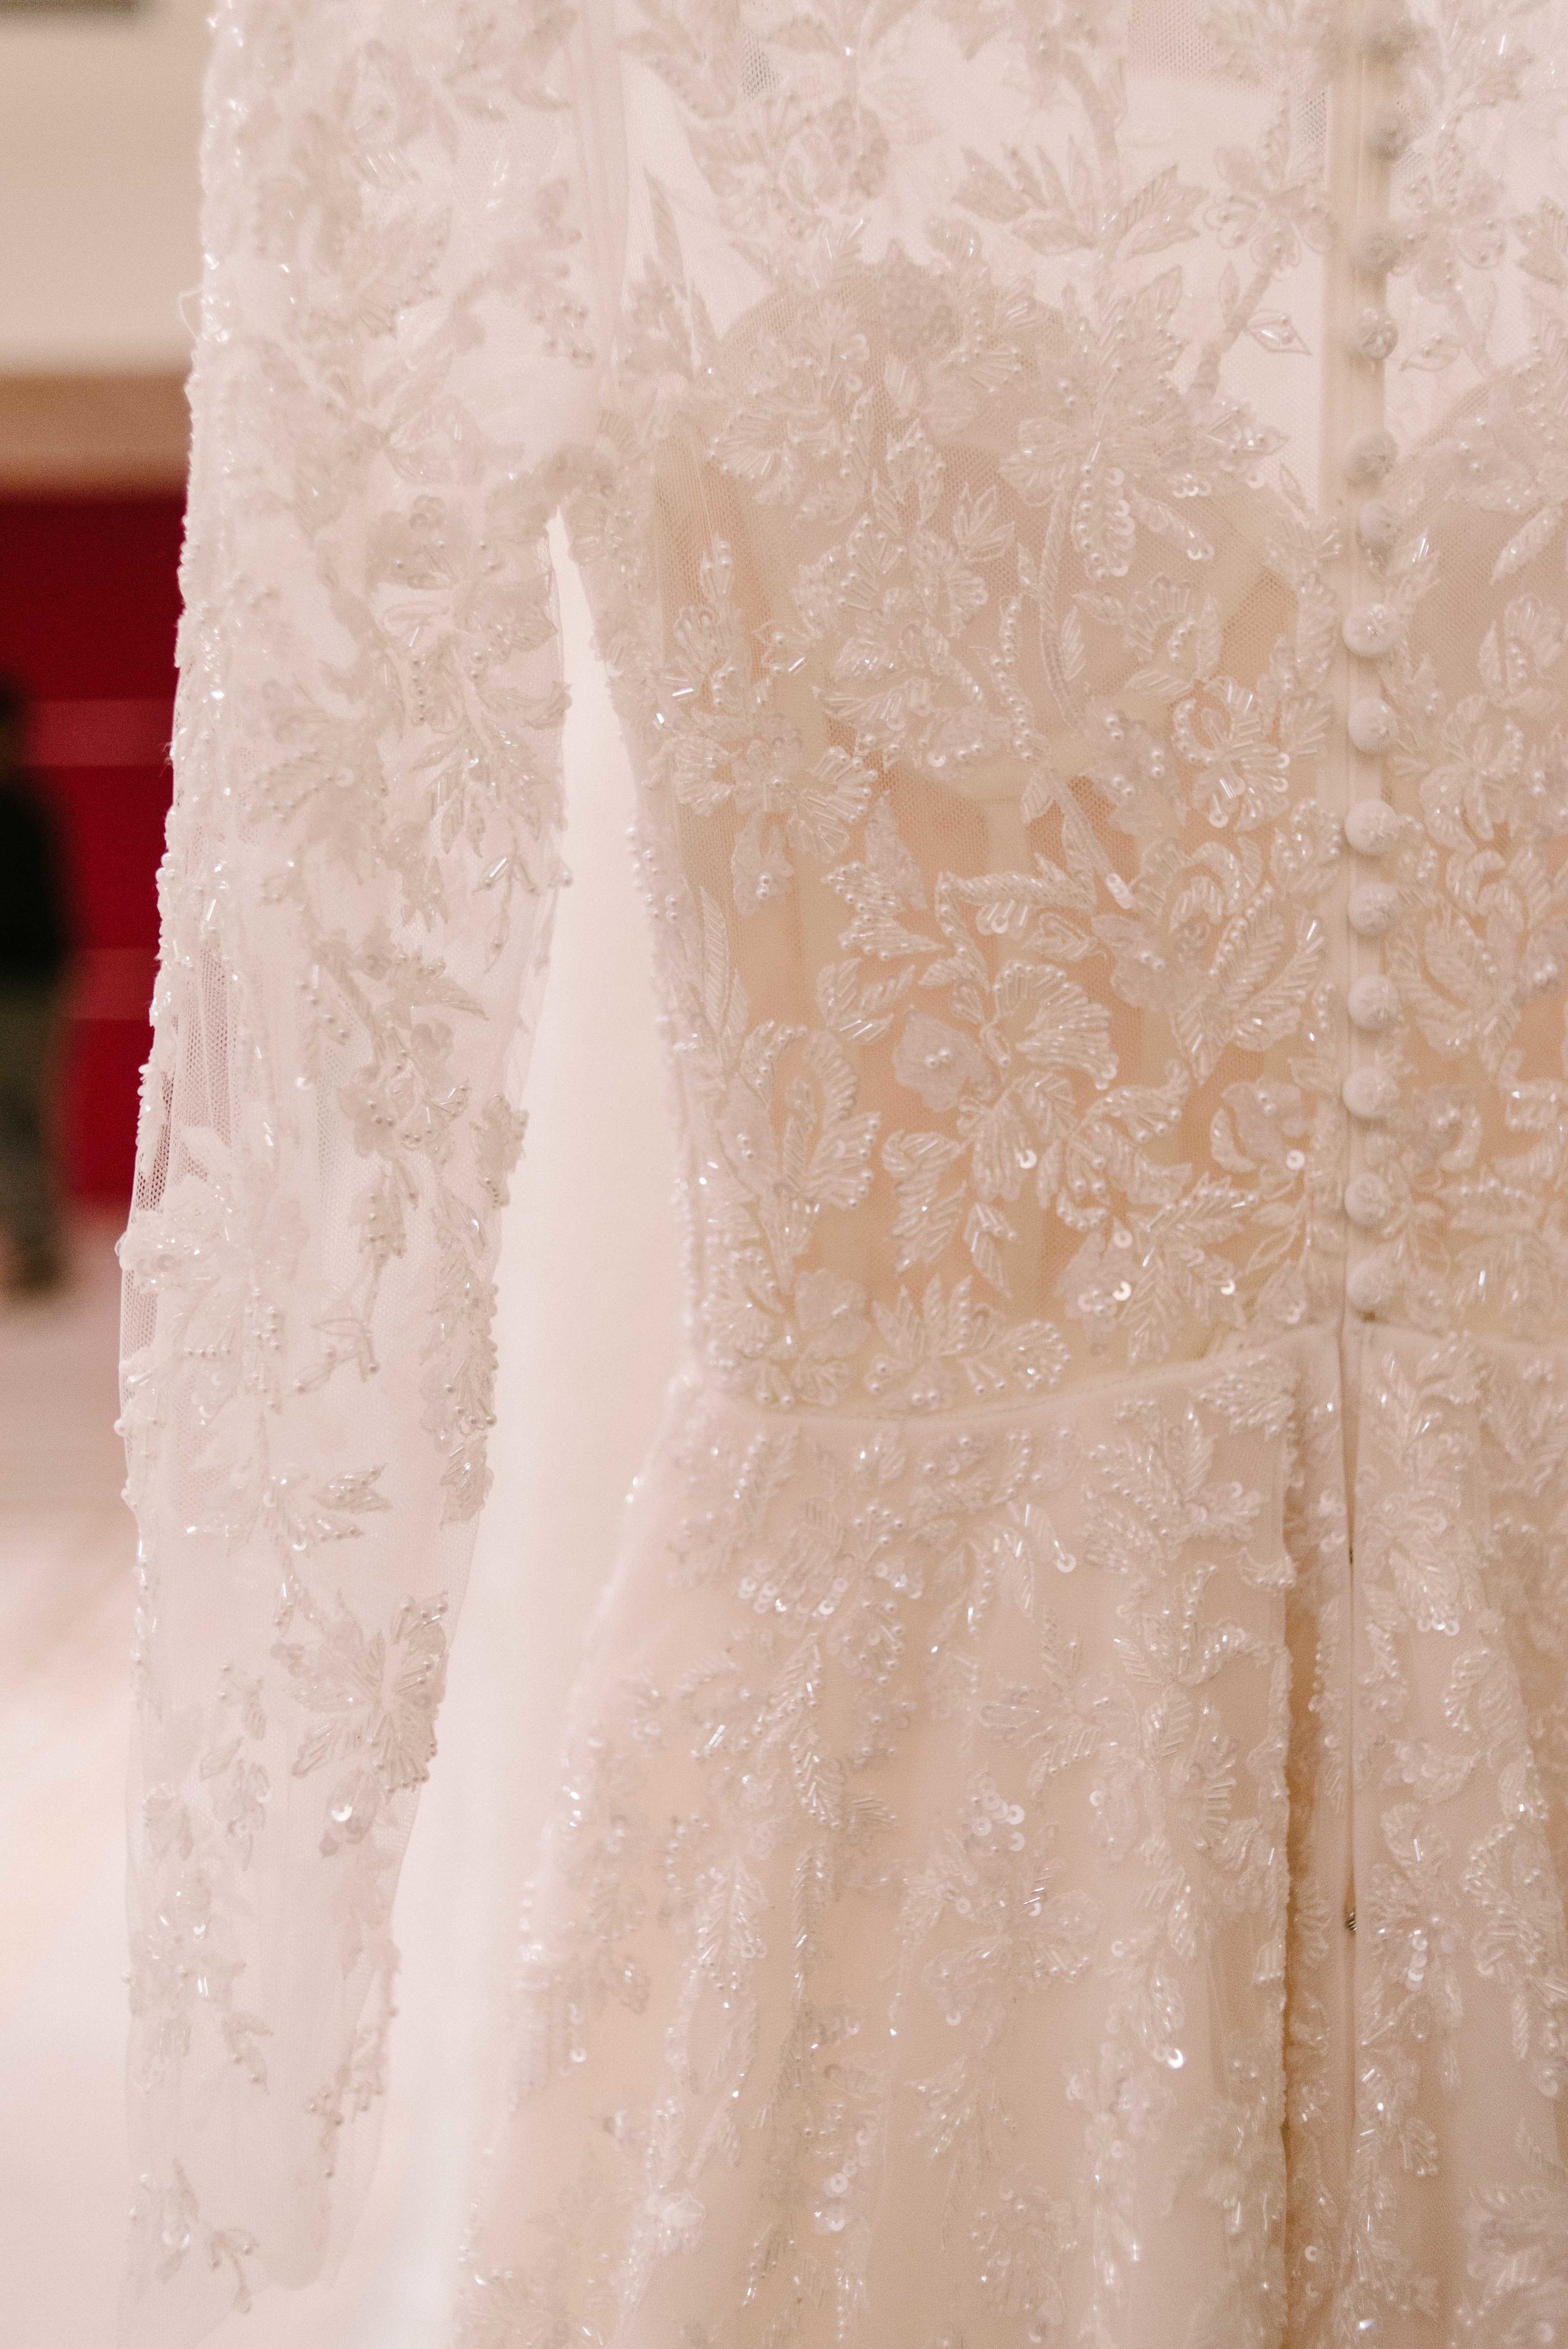  Reem Acra Fall 2016 Bridal Collection 